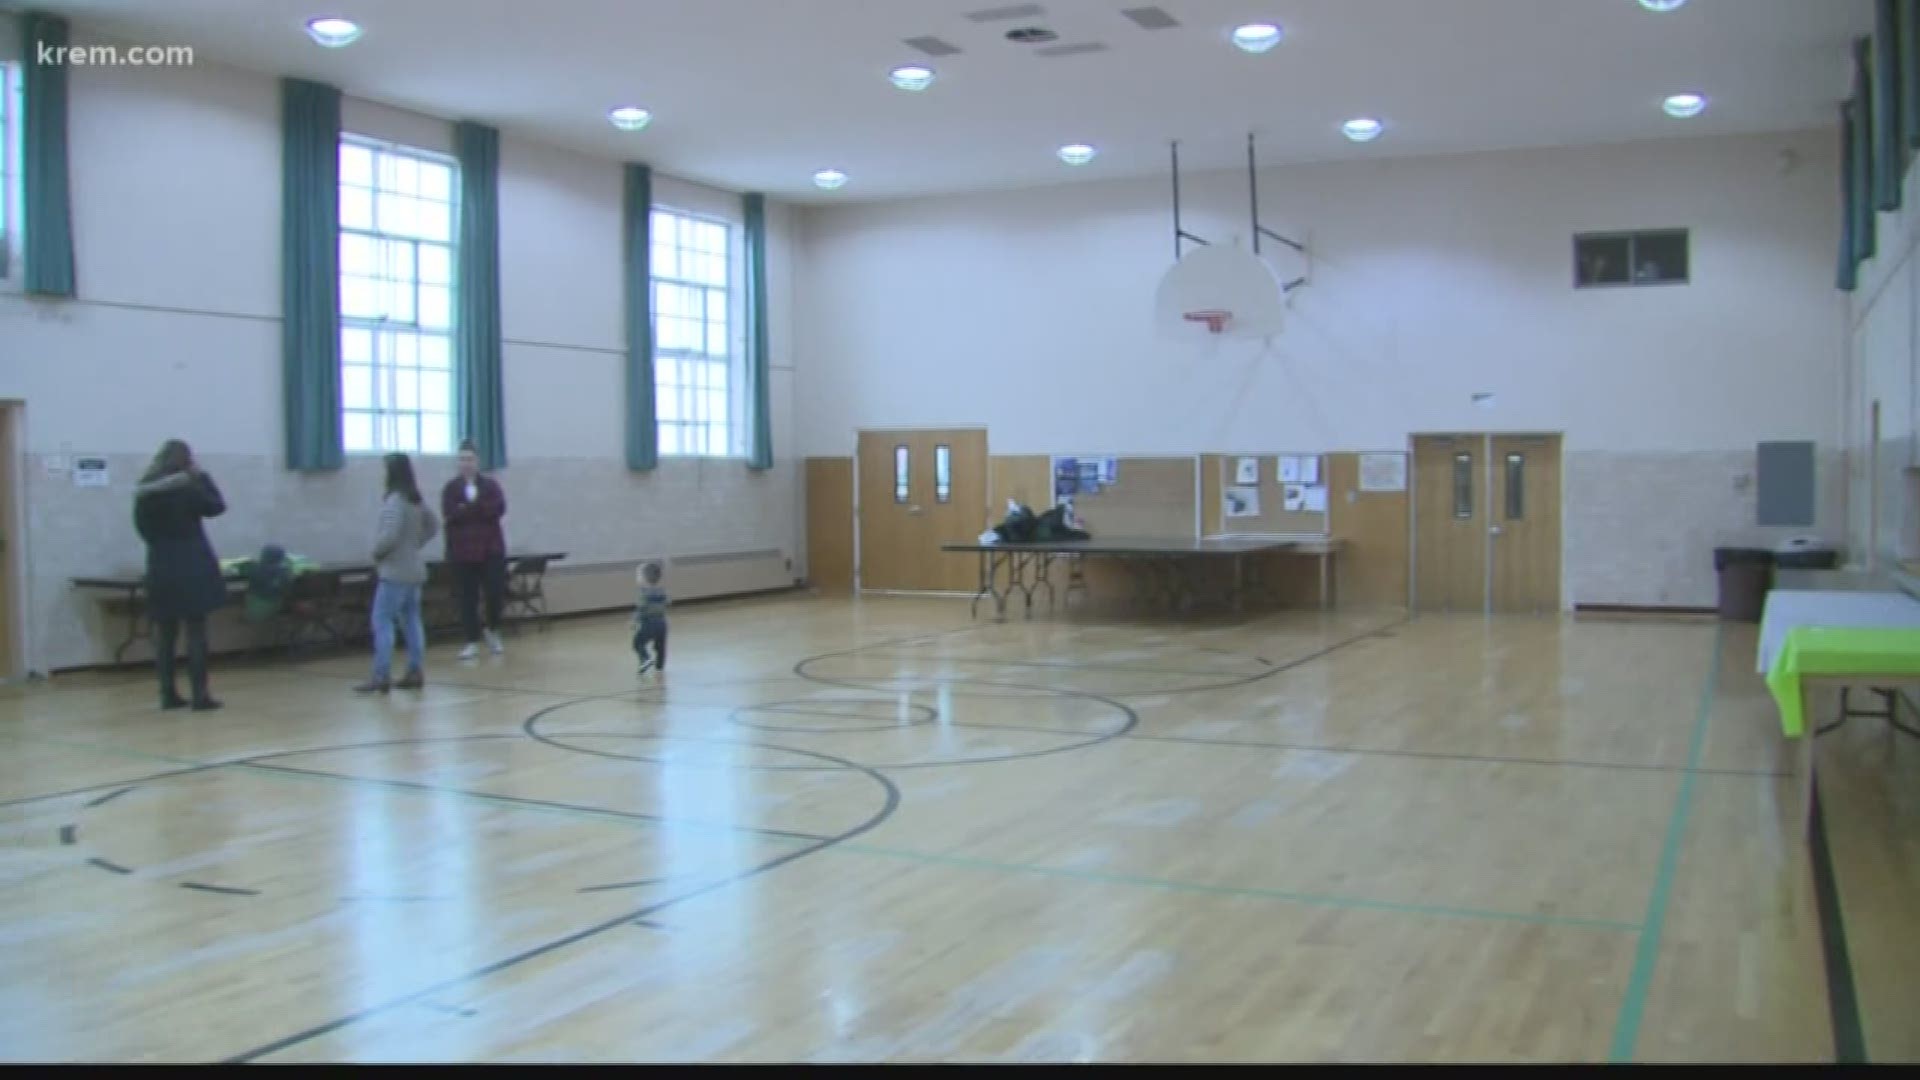 Spokane approves more warming shelters